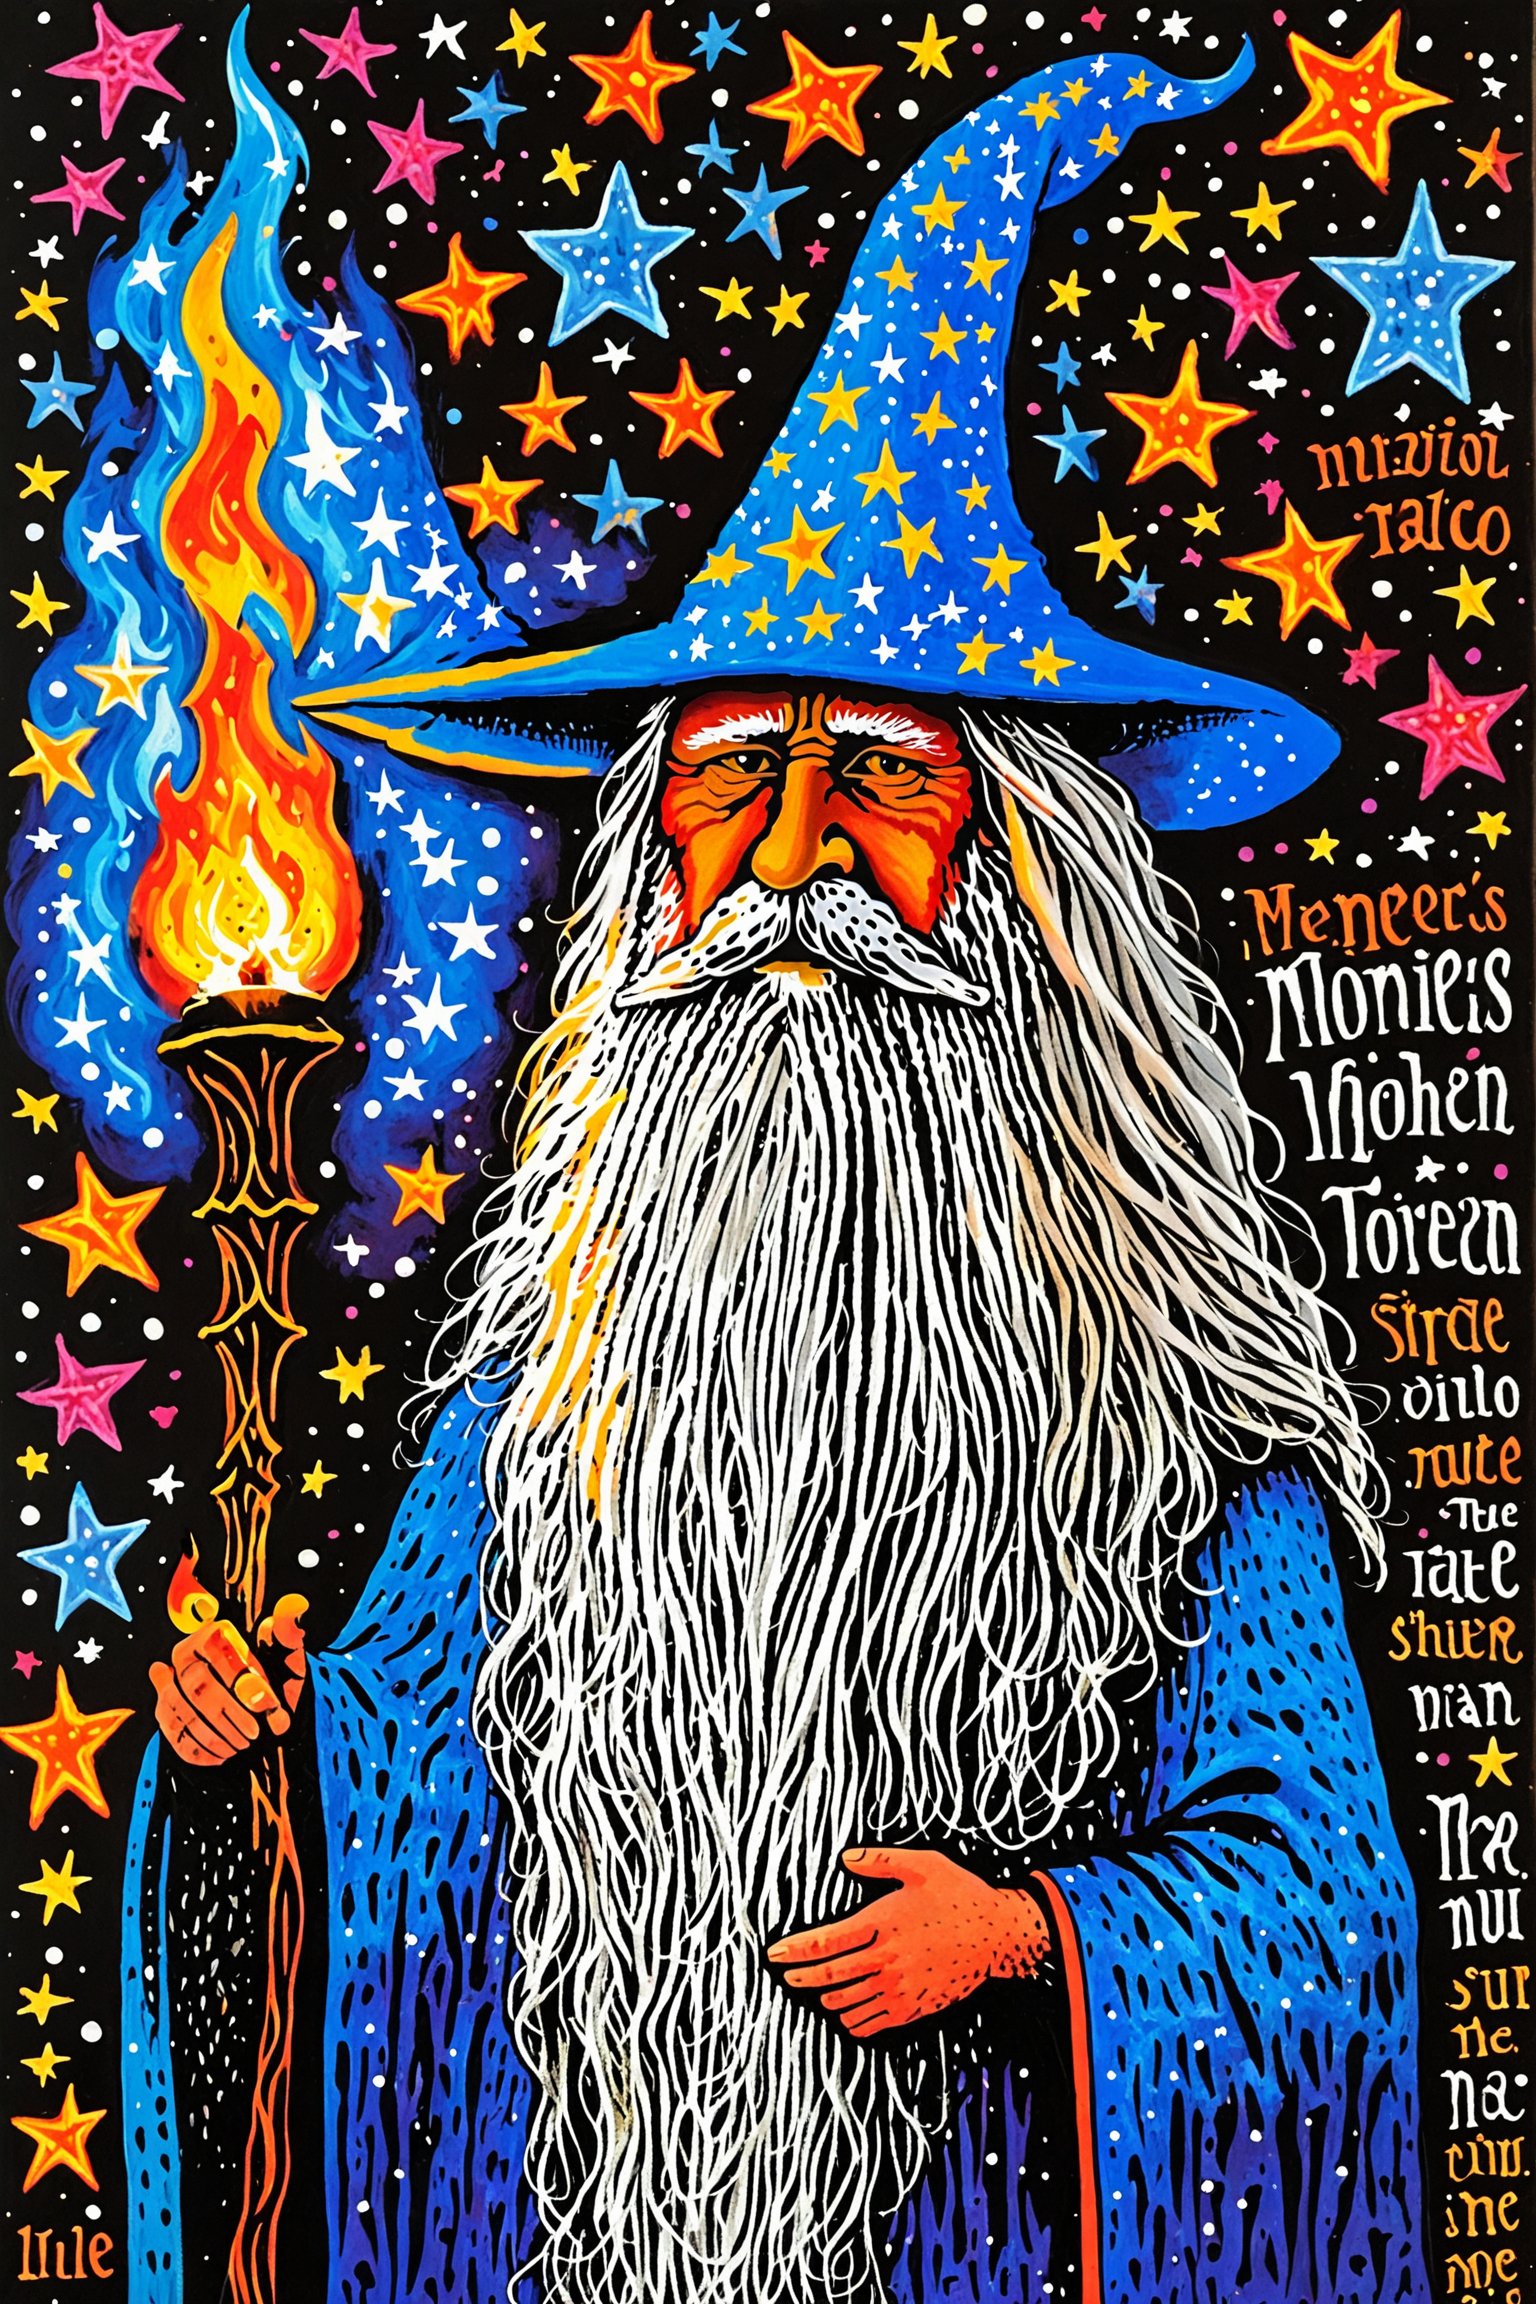 A vibrant and colorful portrayal of a wizard. He dons a tall blue hat adorned with stars and holds a staff with a flaming torch. The wizard's long white beard flows down his chest. The background is filled with a myriad of magical symbols, names of spells, and celestial motifs.